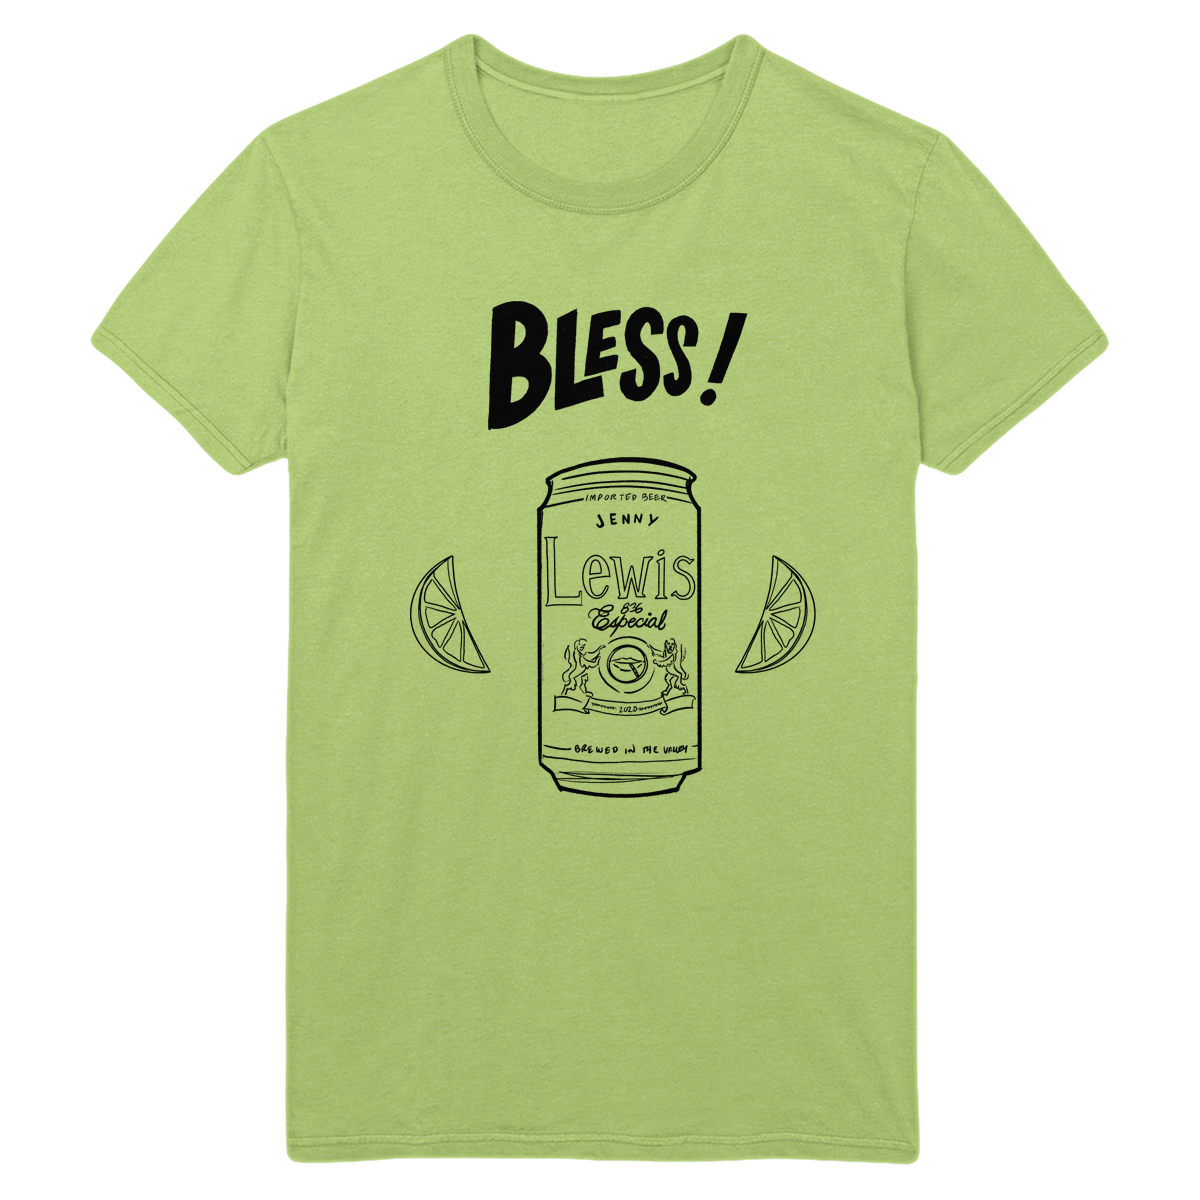 Bless! Lime Tee